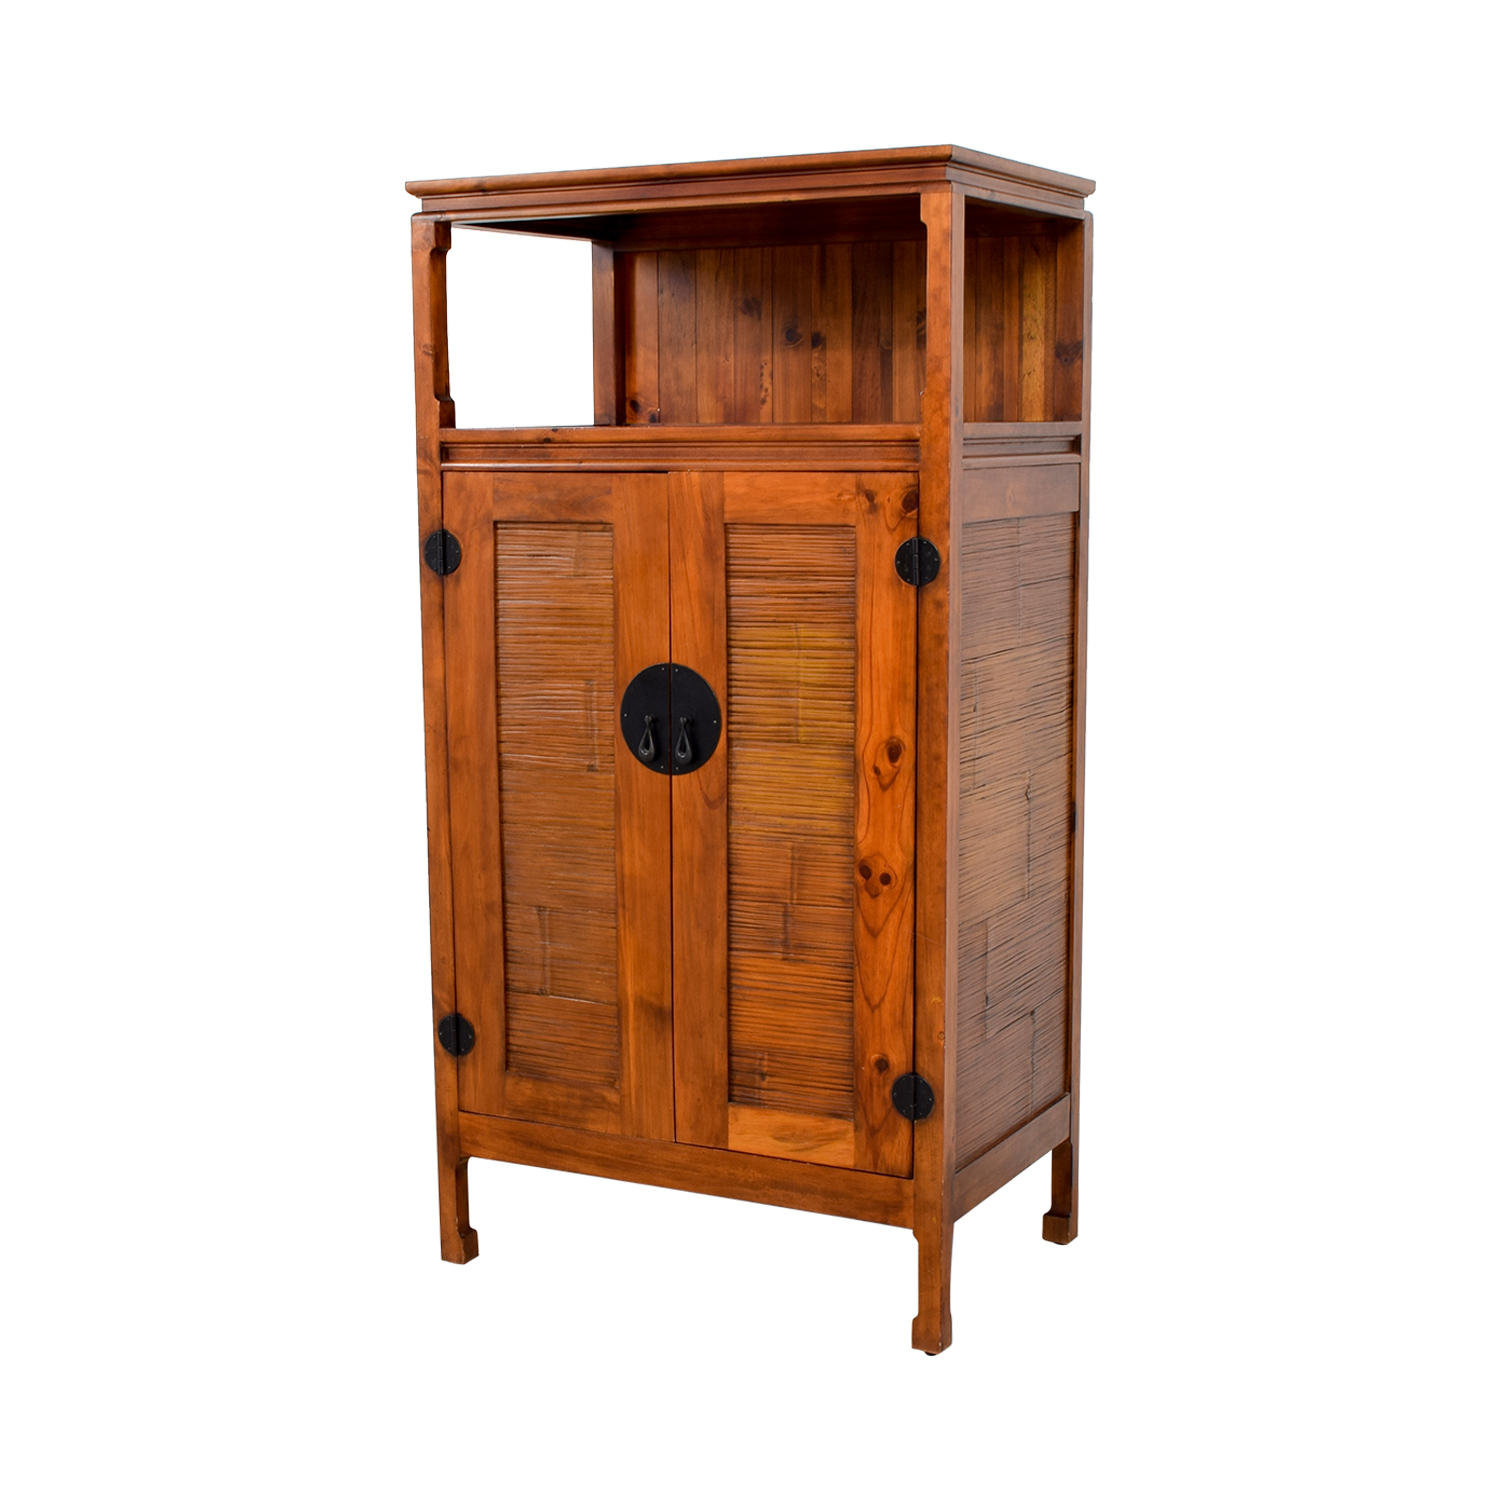 90 Off Pier 1 Pier 1 Imports Asian Armoire Or Entertainment Cabinet Storage in size 1500 X 1500